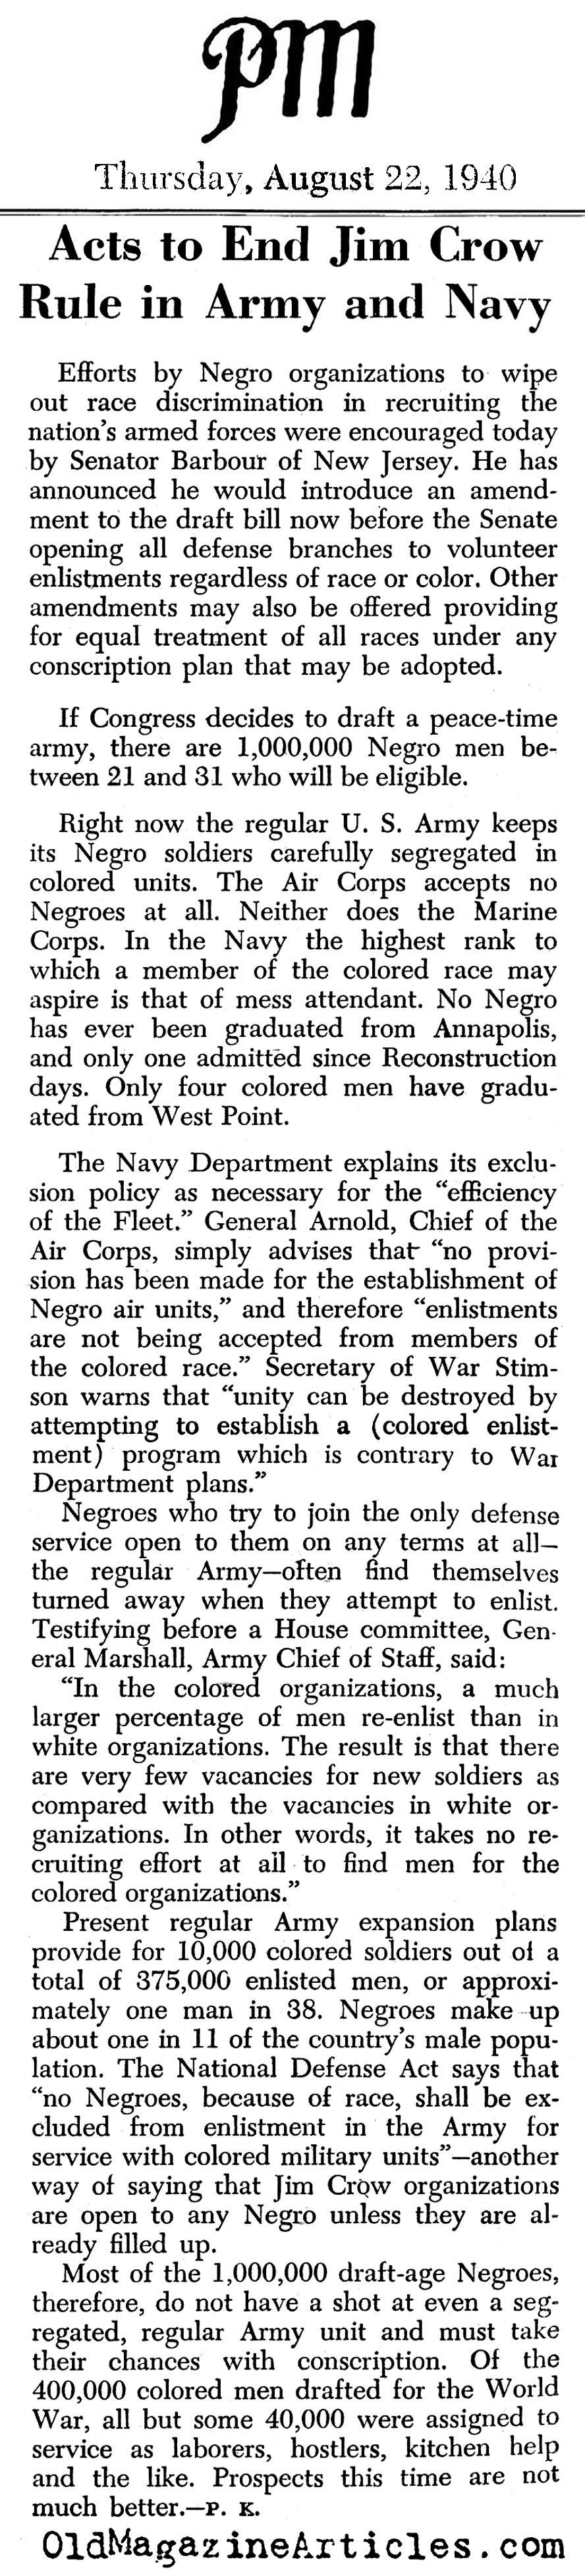 Jim Crow and the Draft (PM Tabloid, 1940)